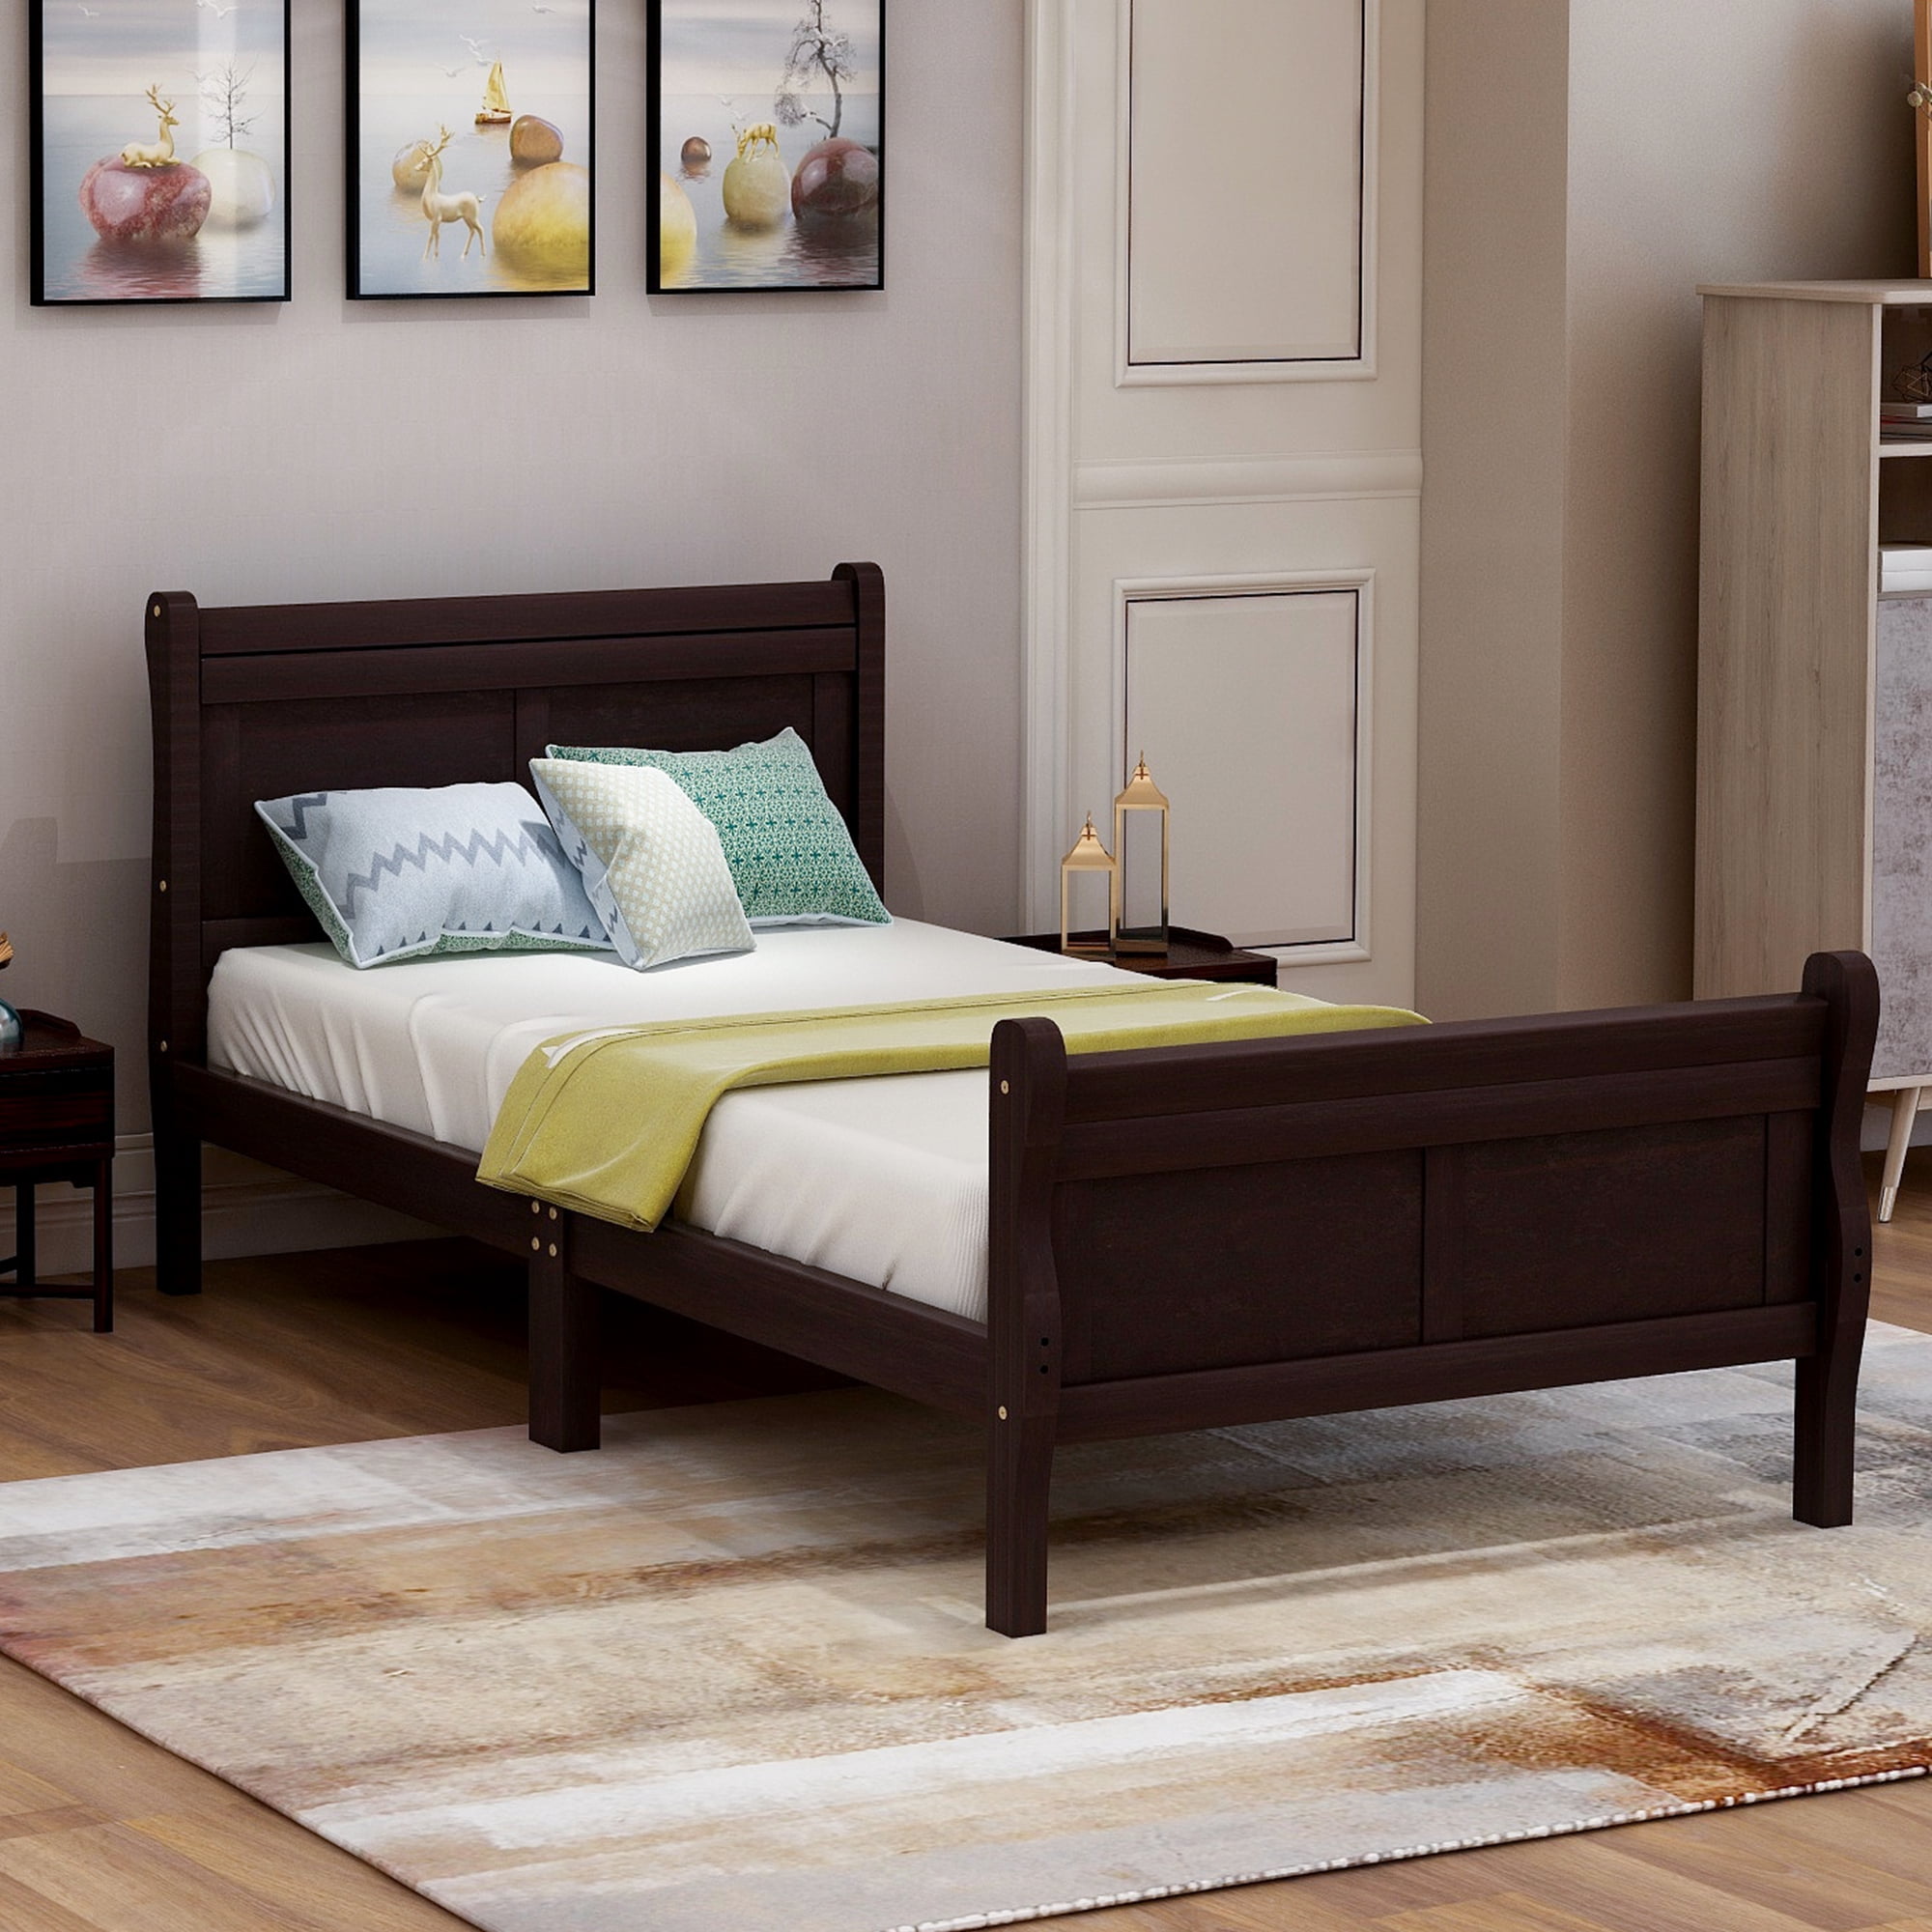 Clearance! Twin Bed Frame, Espresso Twin Platform Bed Frame with